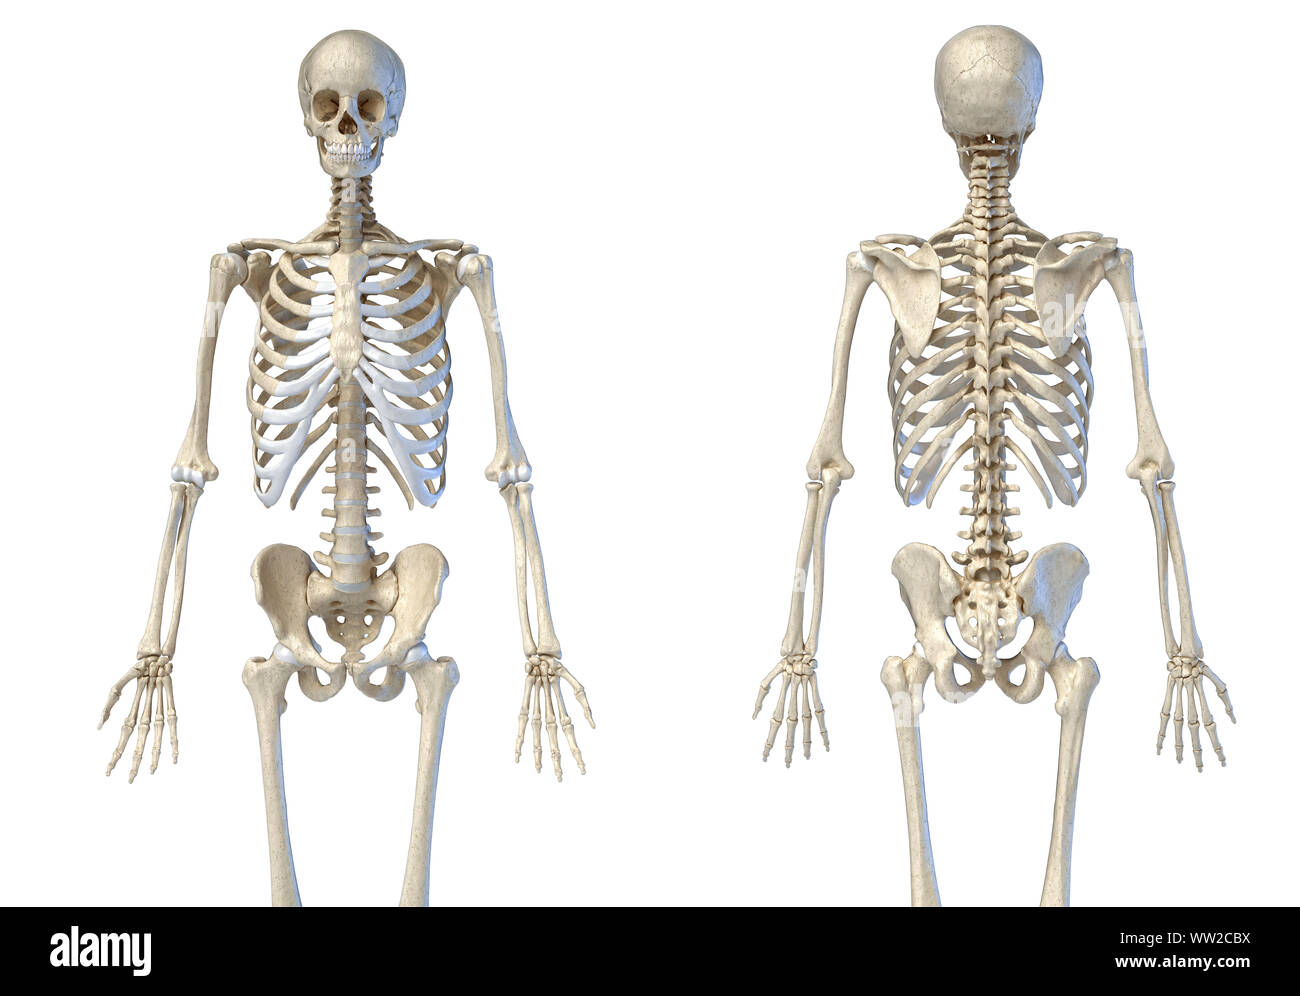 Human Anatomy 3/4 body male skeleton. Front and rear views on white background. 3d illustration. Stock Photo